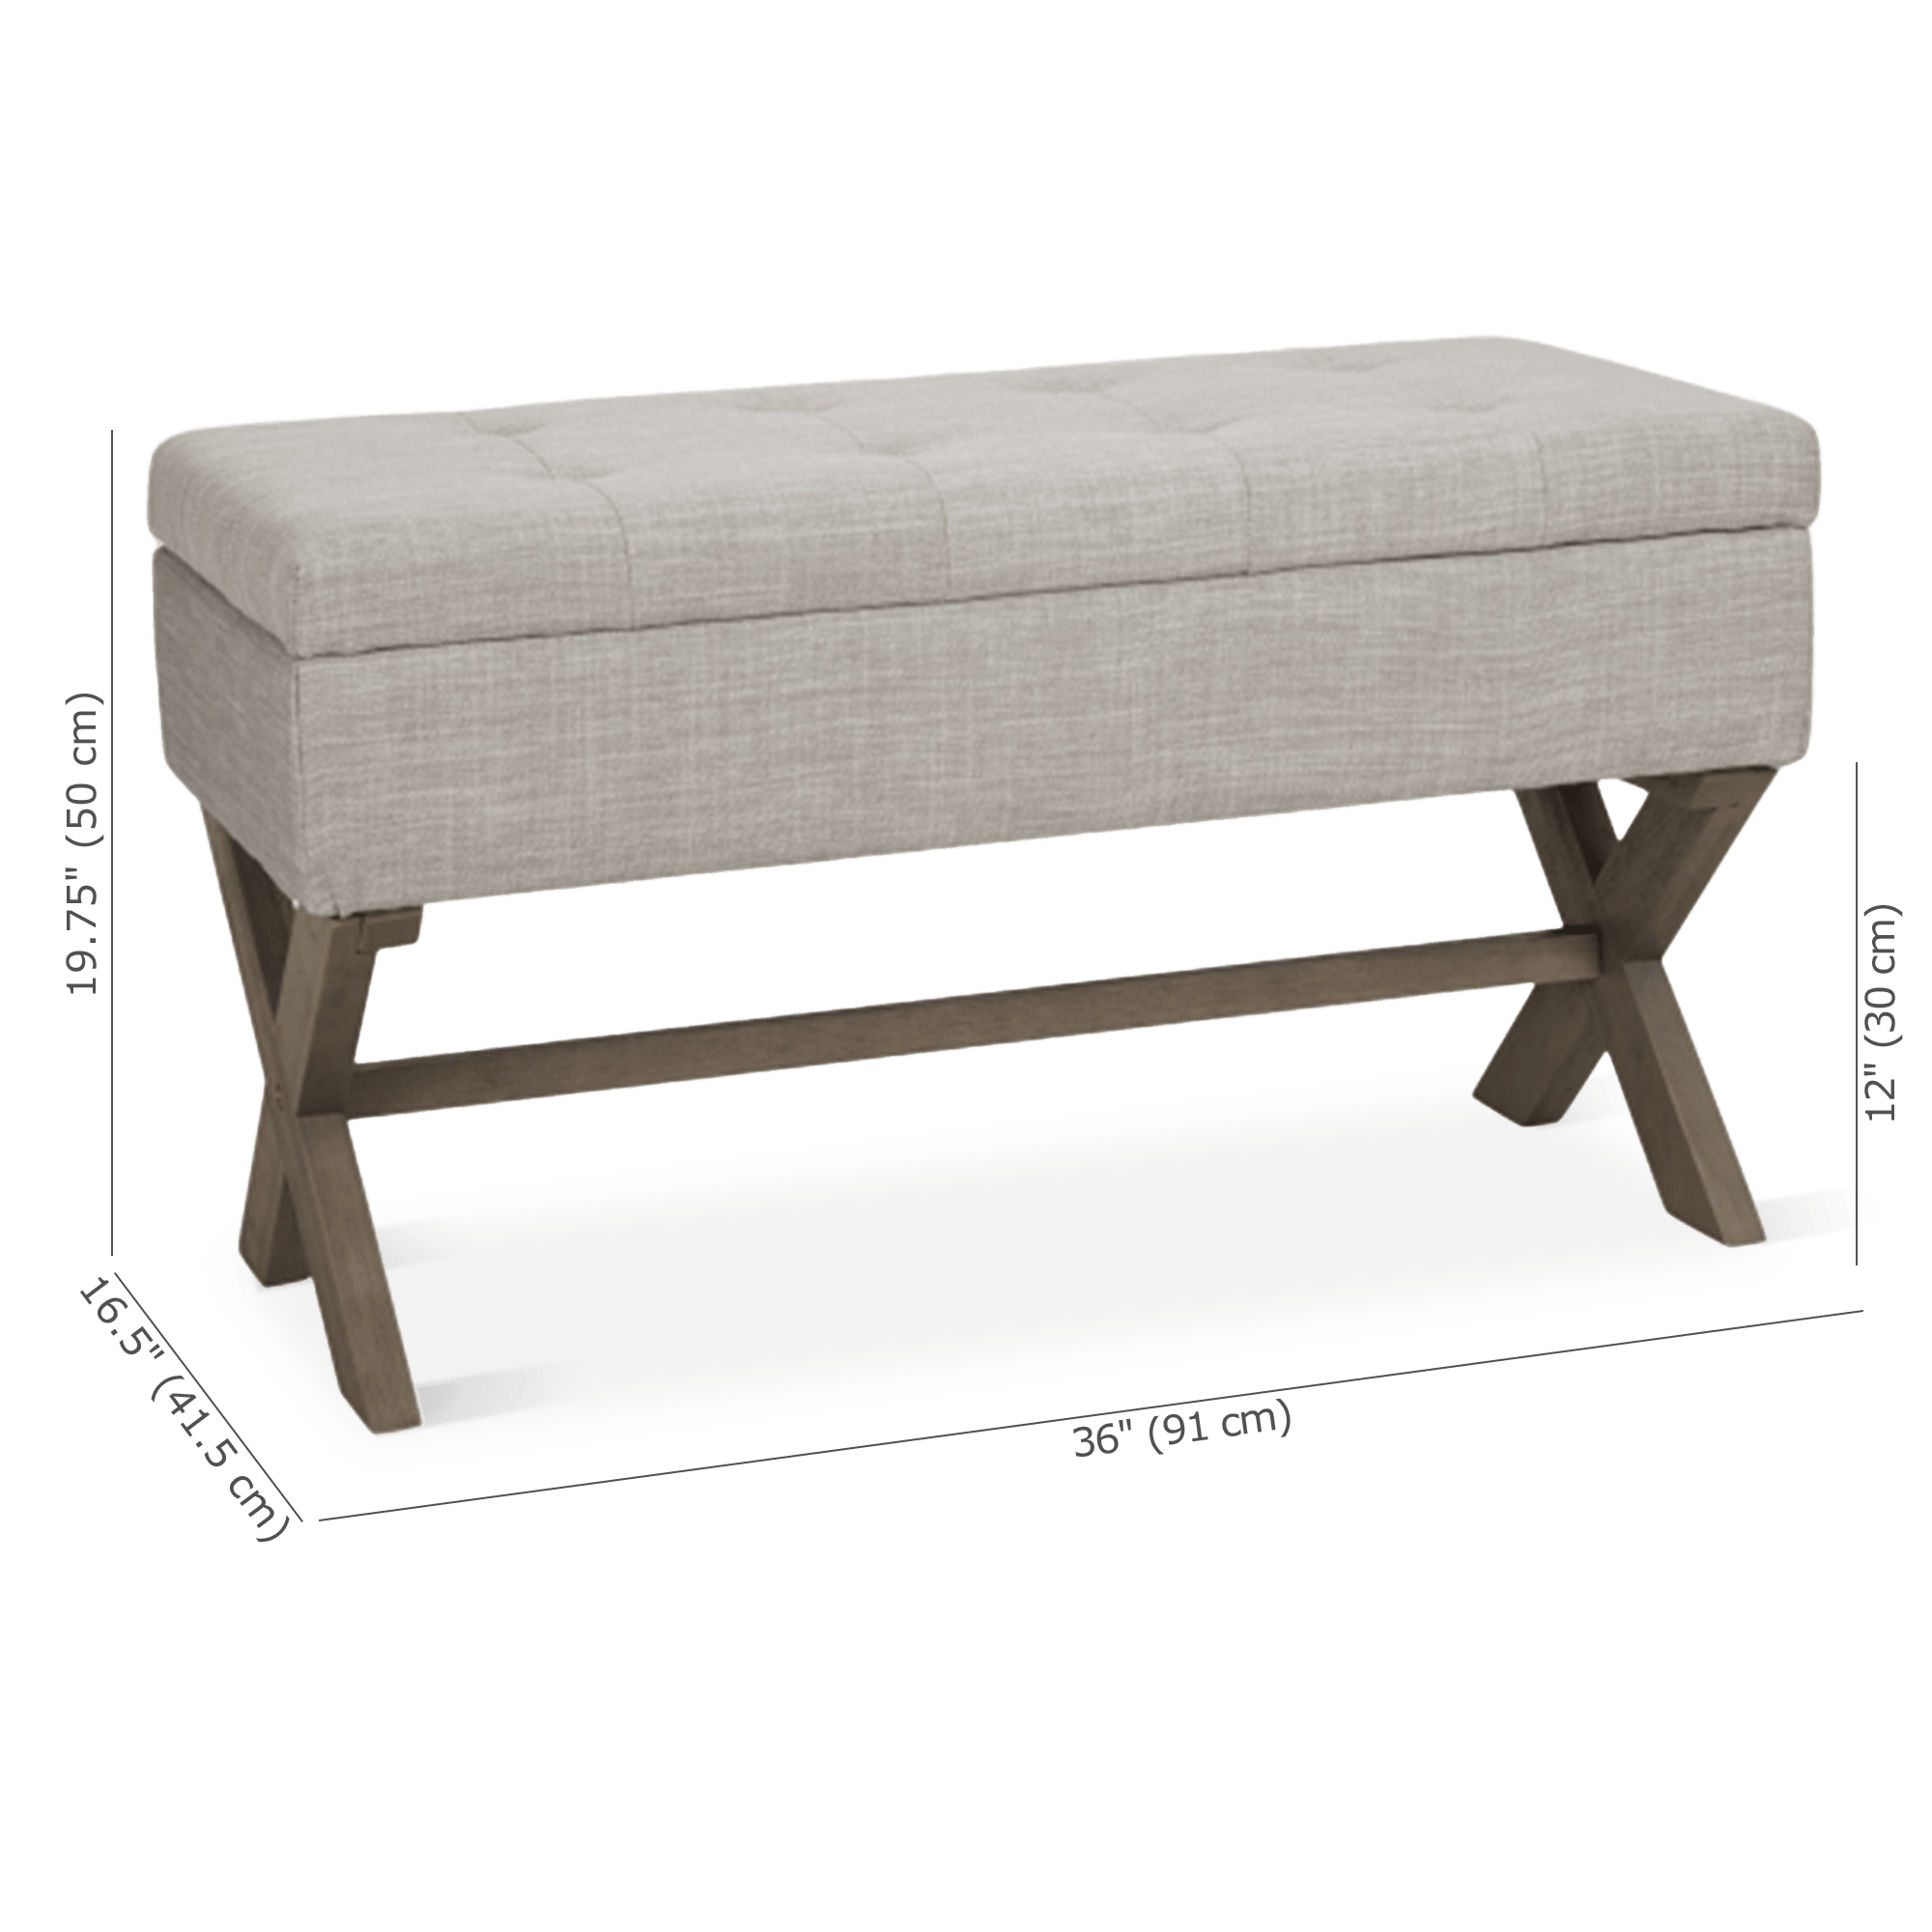 Upholstered Fabric and Wood Storage Bench